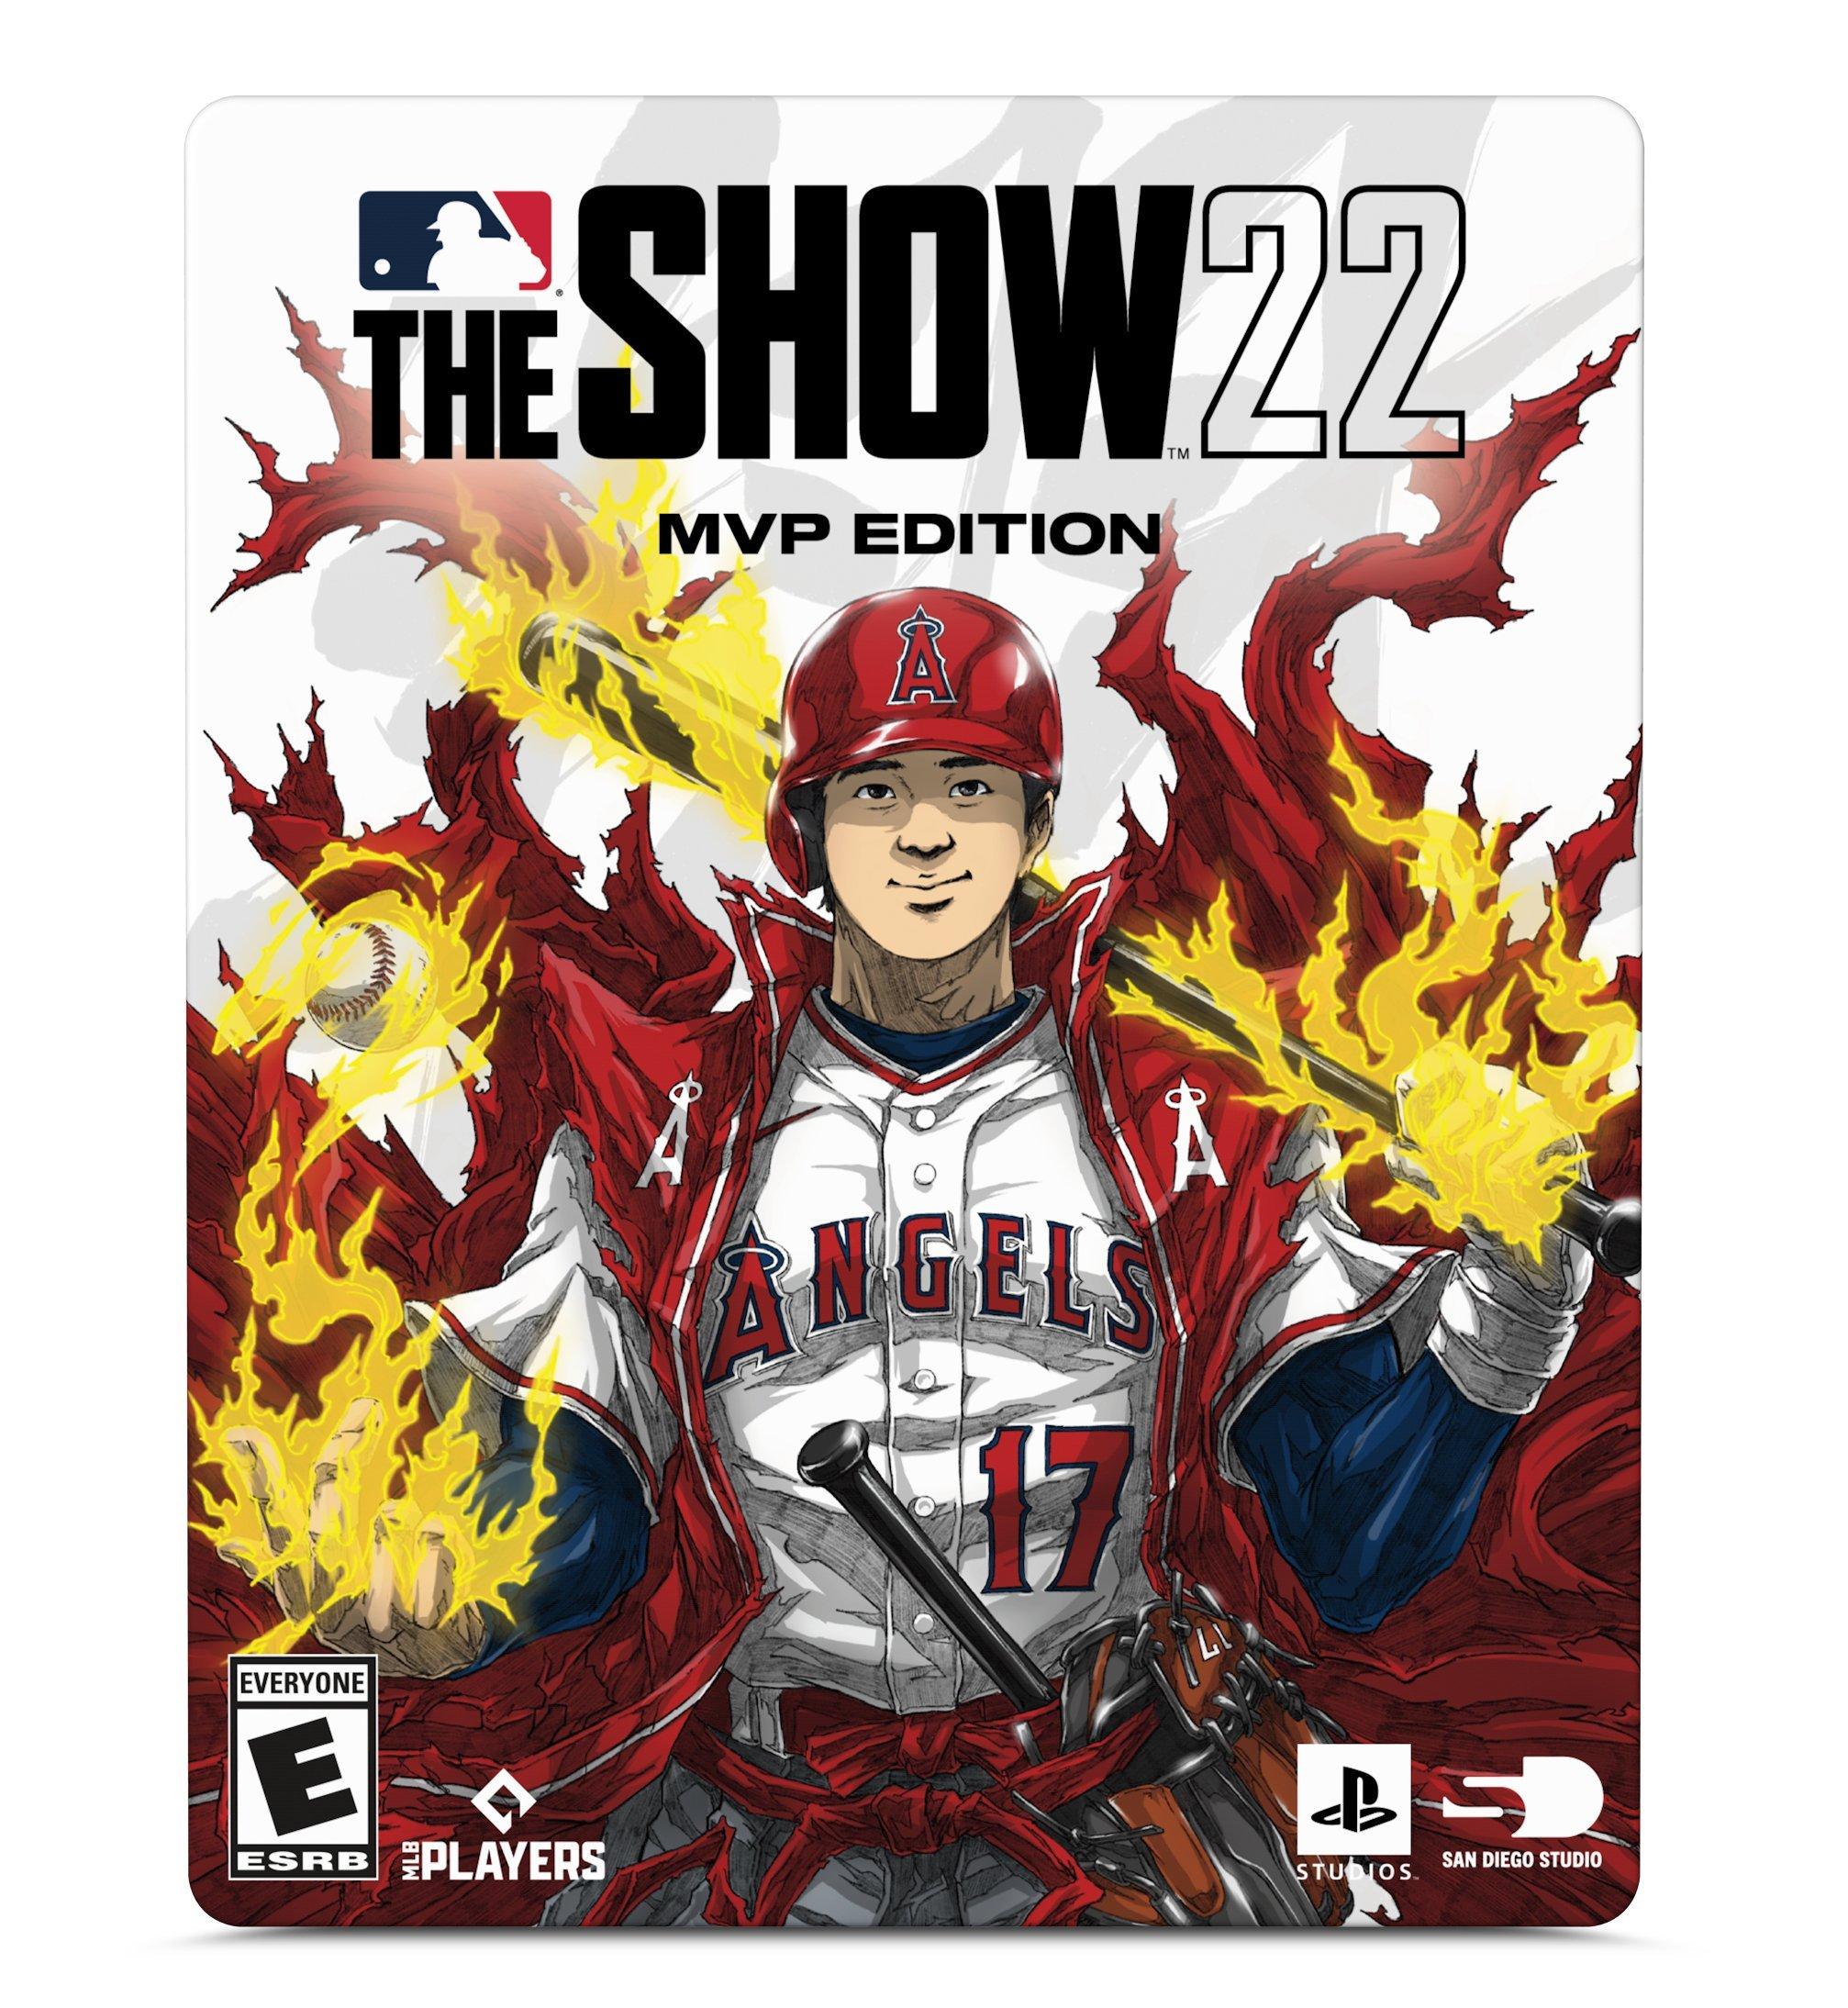 Looking Good! achievement in MLB The Show 23